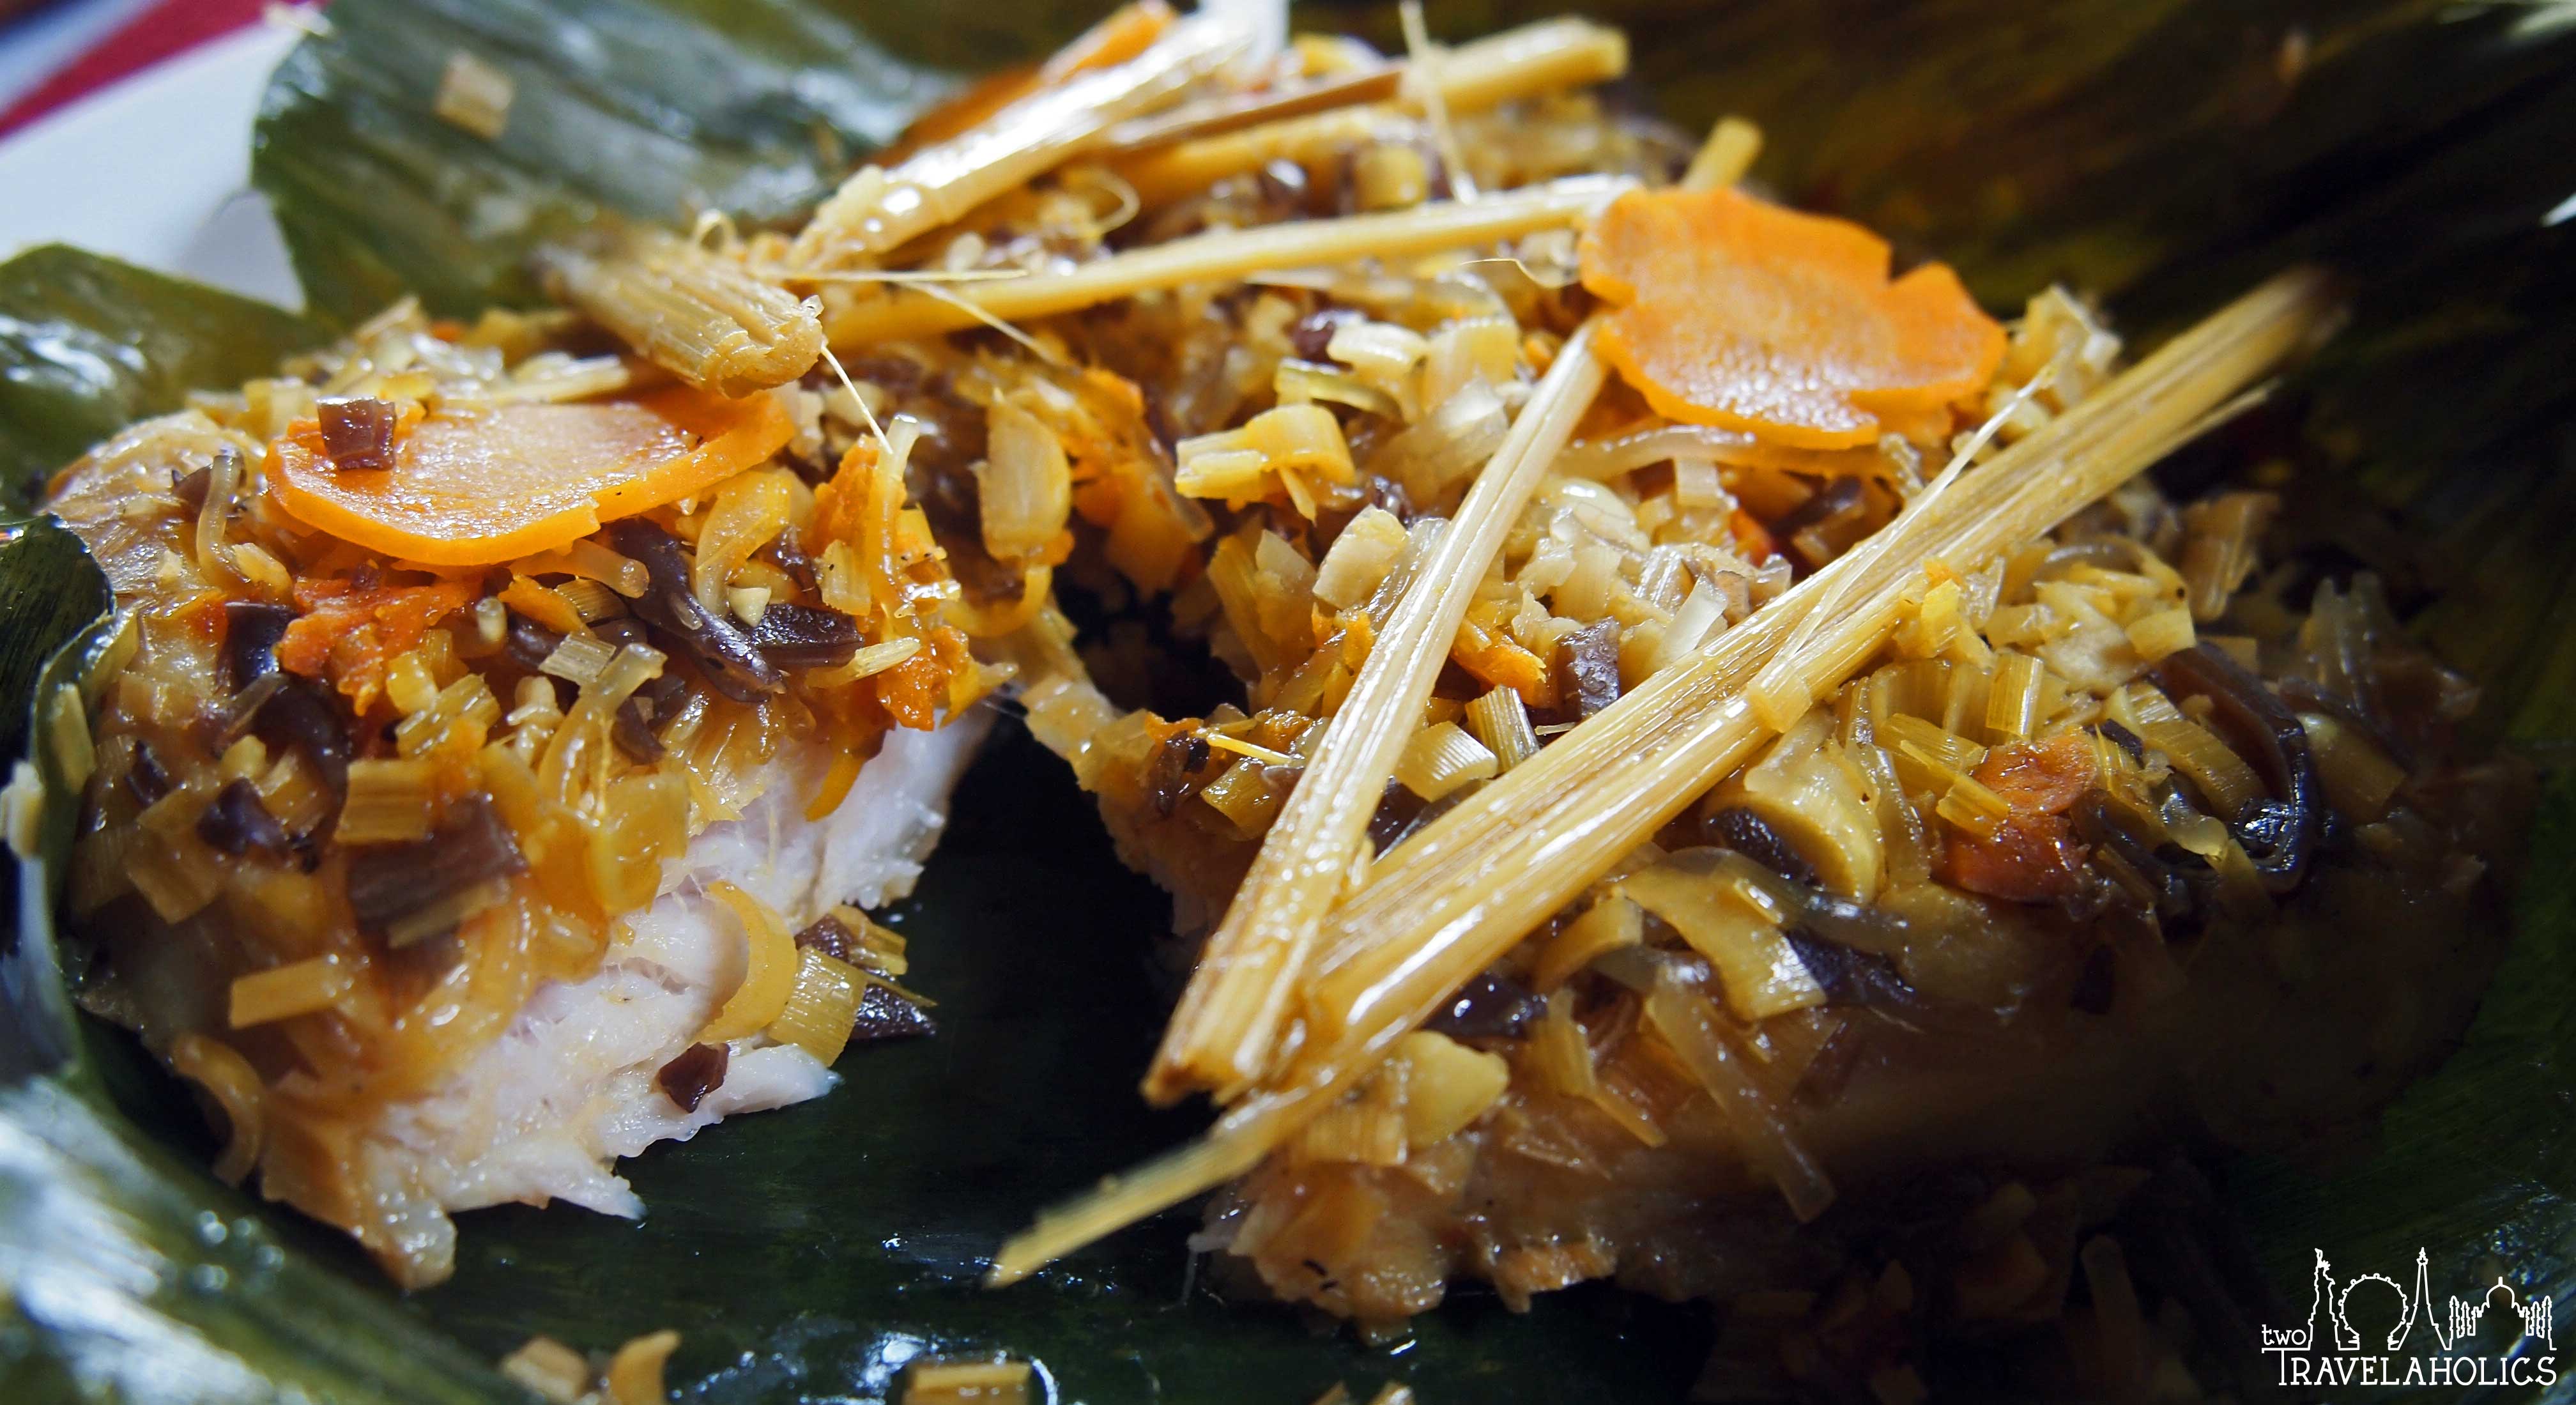 Steamed Fish In Banana Leaves Recipe - NDTV Food